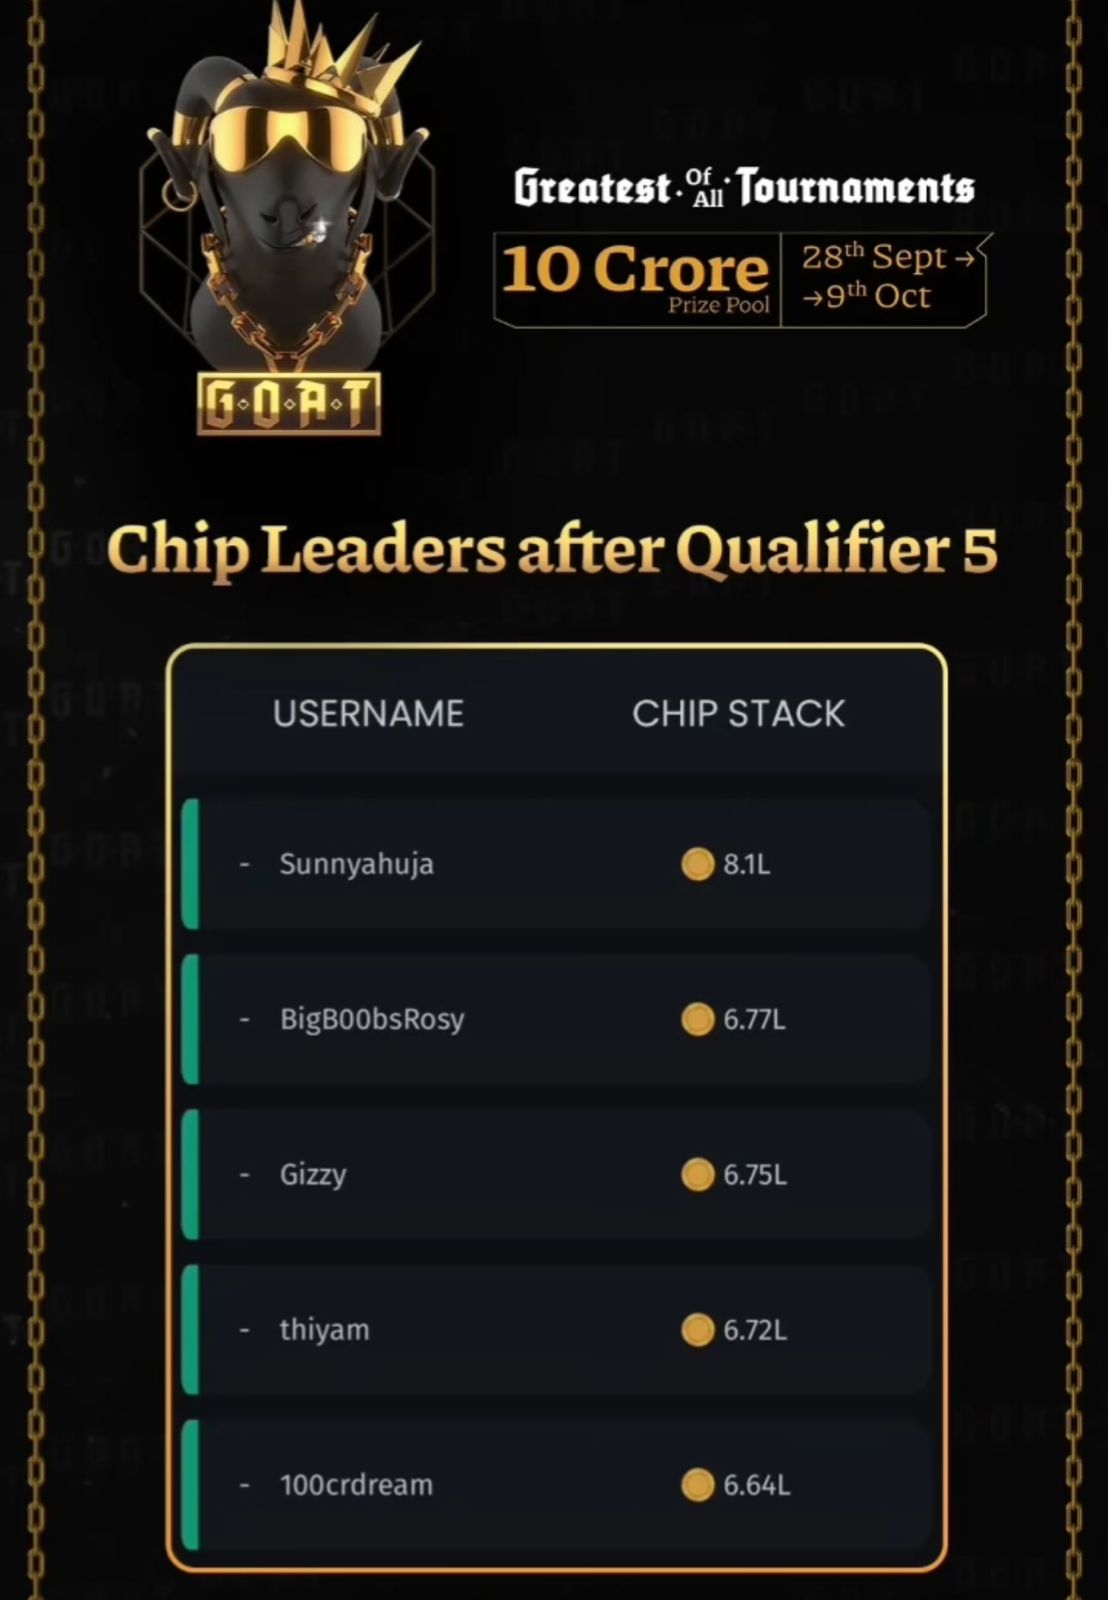 PokerBaazi GOAT 2023: Top Qualifiers And Chip Leaders